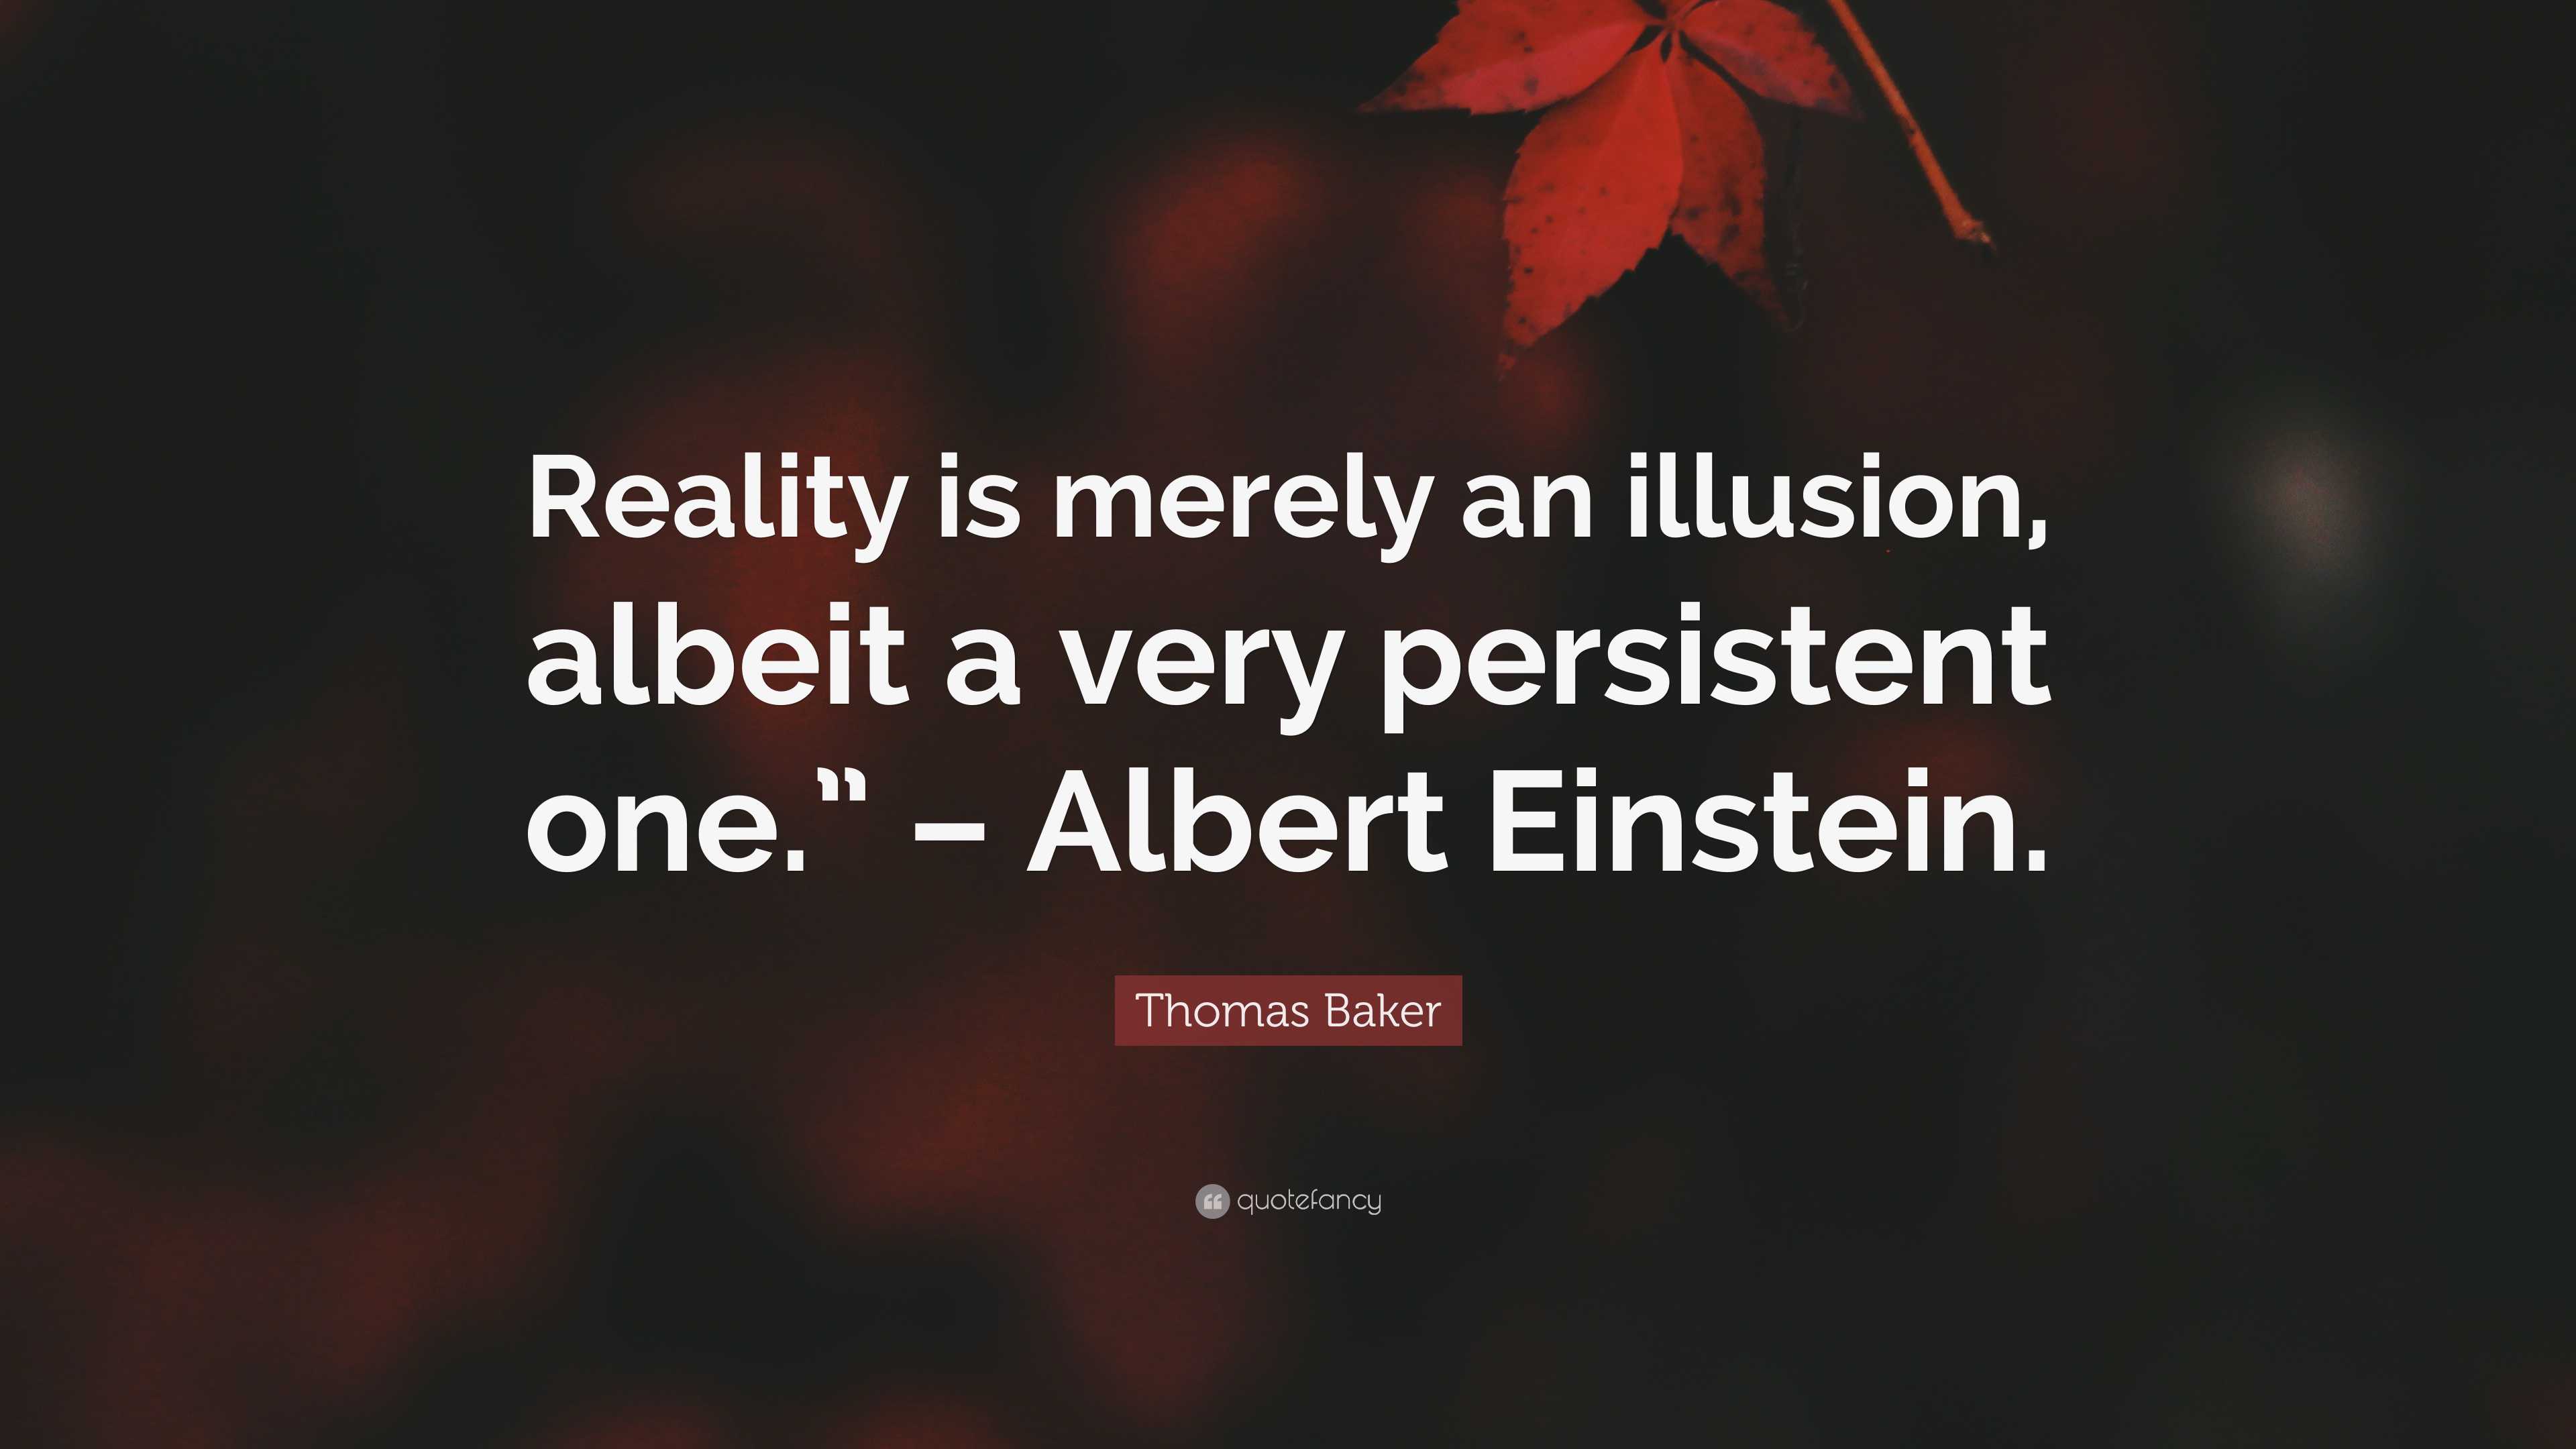 Reality is merely an illusion albeit a very Picture Quotes 4946 -  AllAuthor